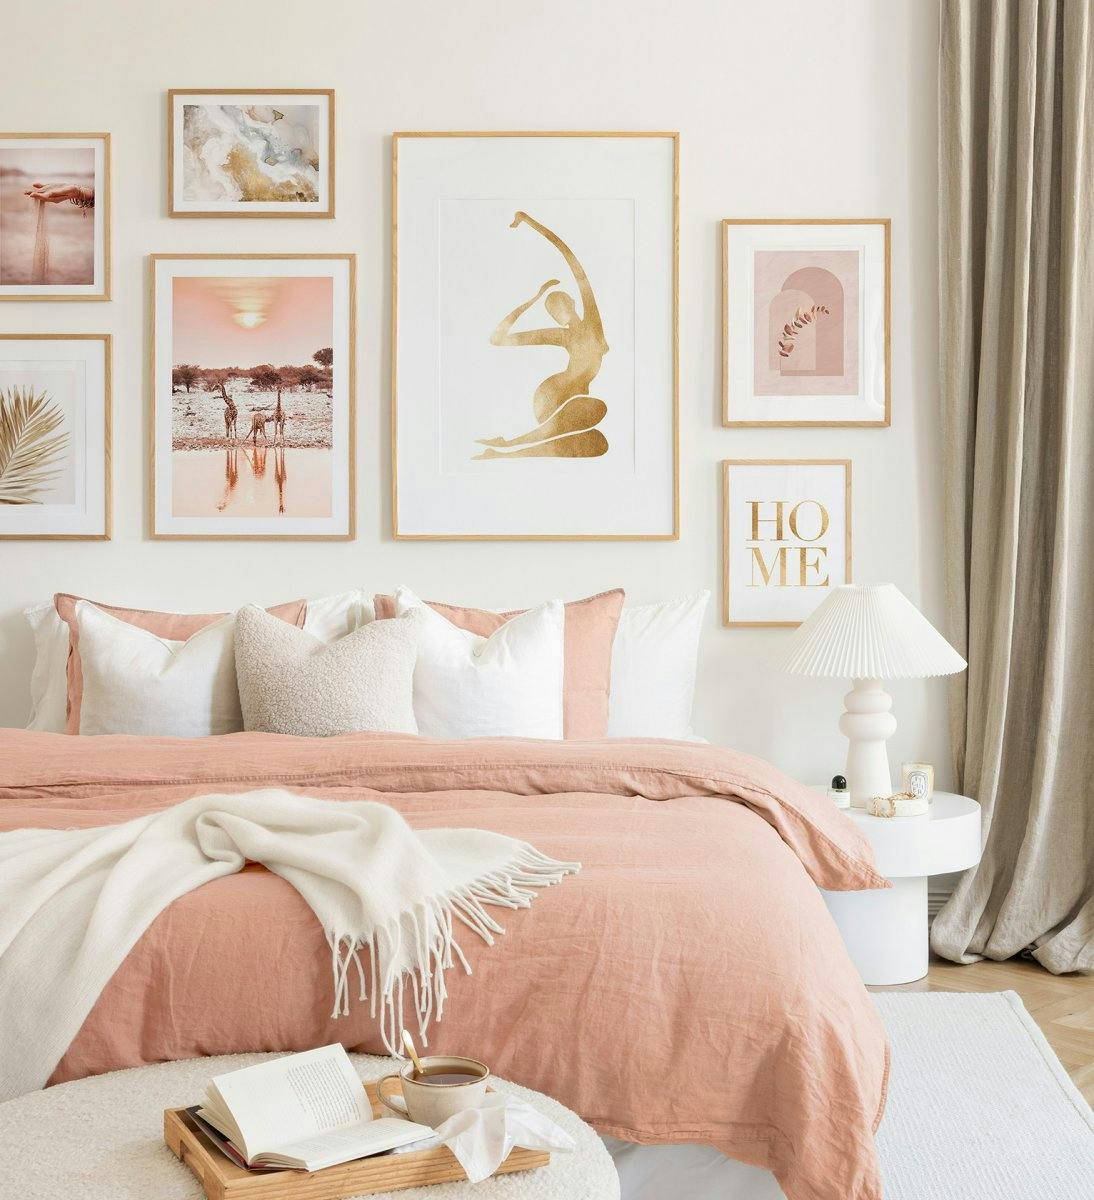 A gallery wall with soft pink and beige tones in oak frames creates a harmonious ambience in your bedroom.